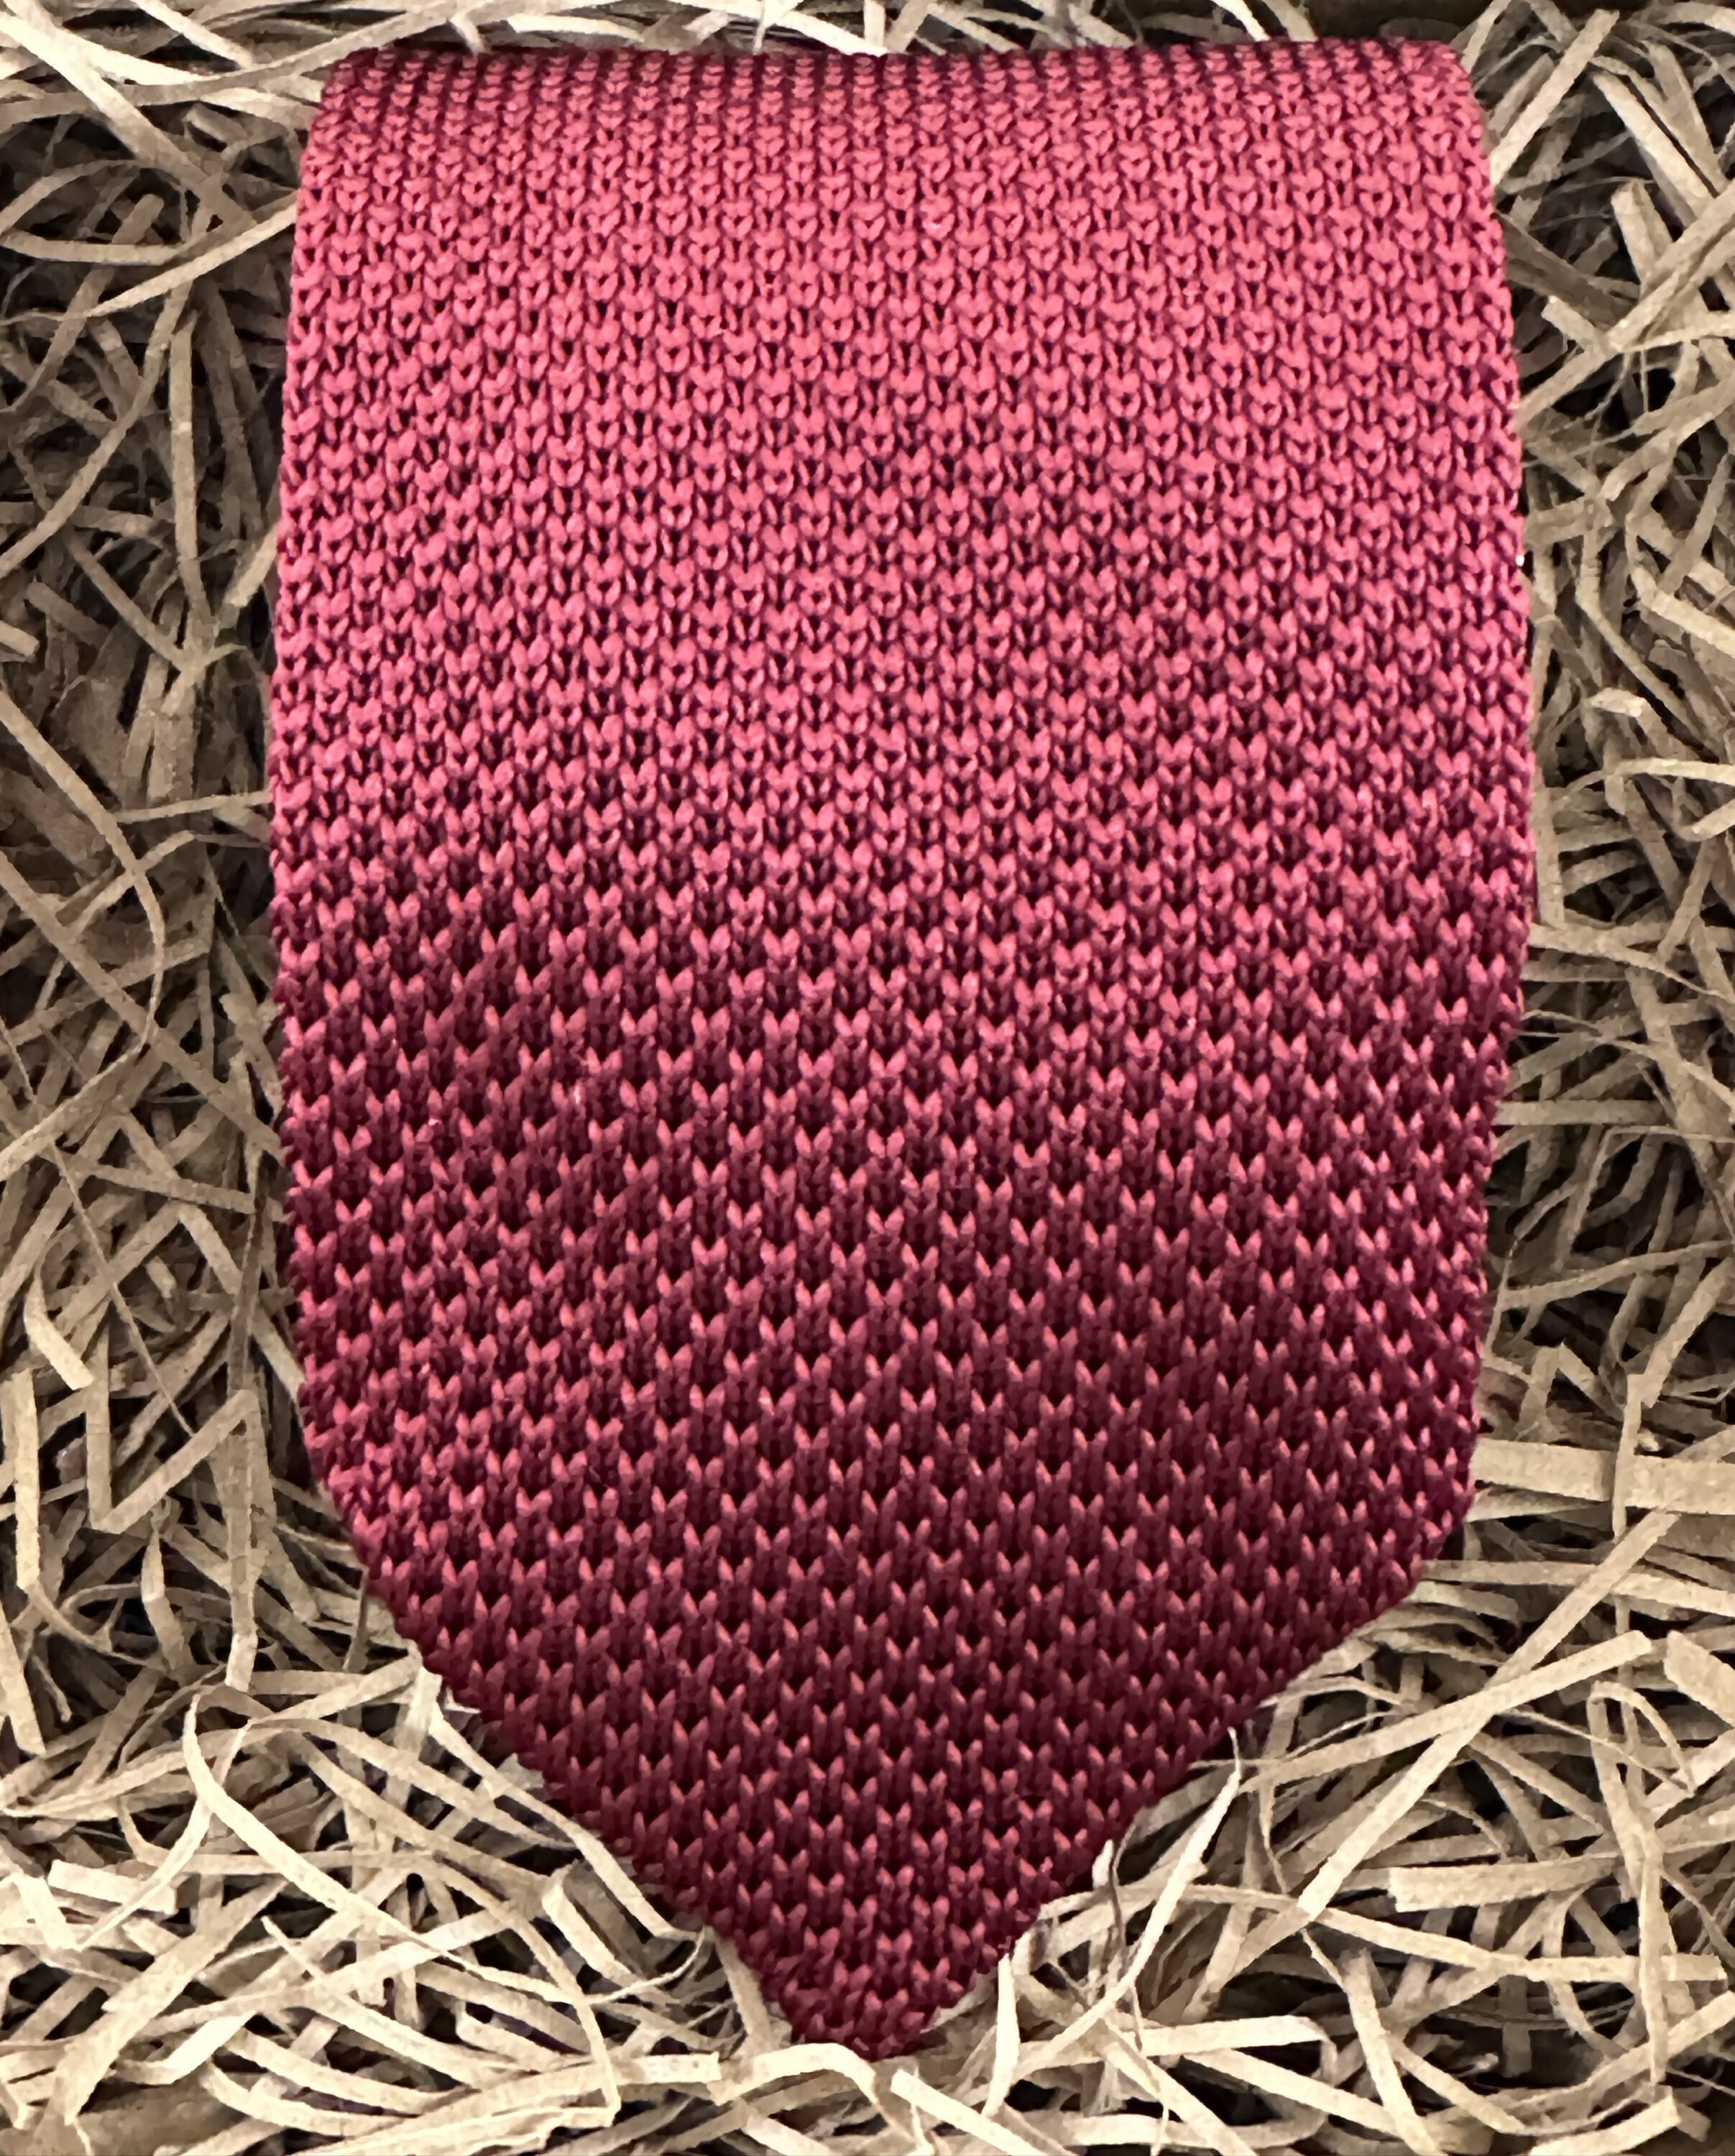 A photo of a red knitted tie